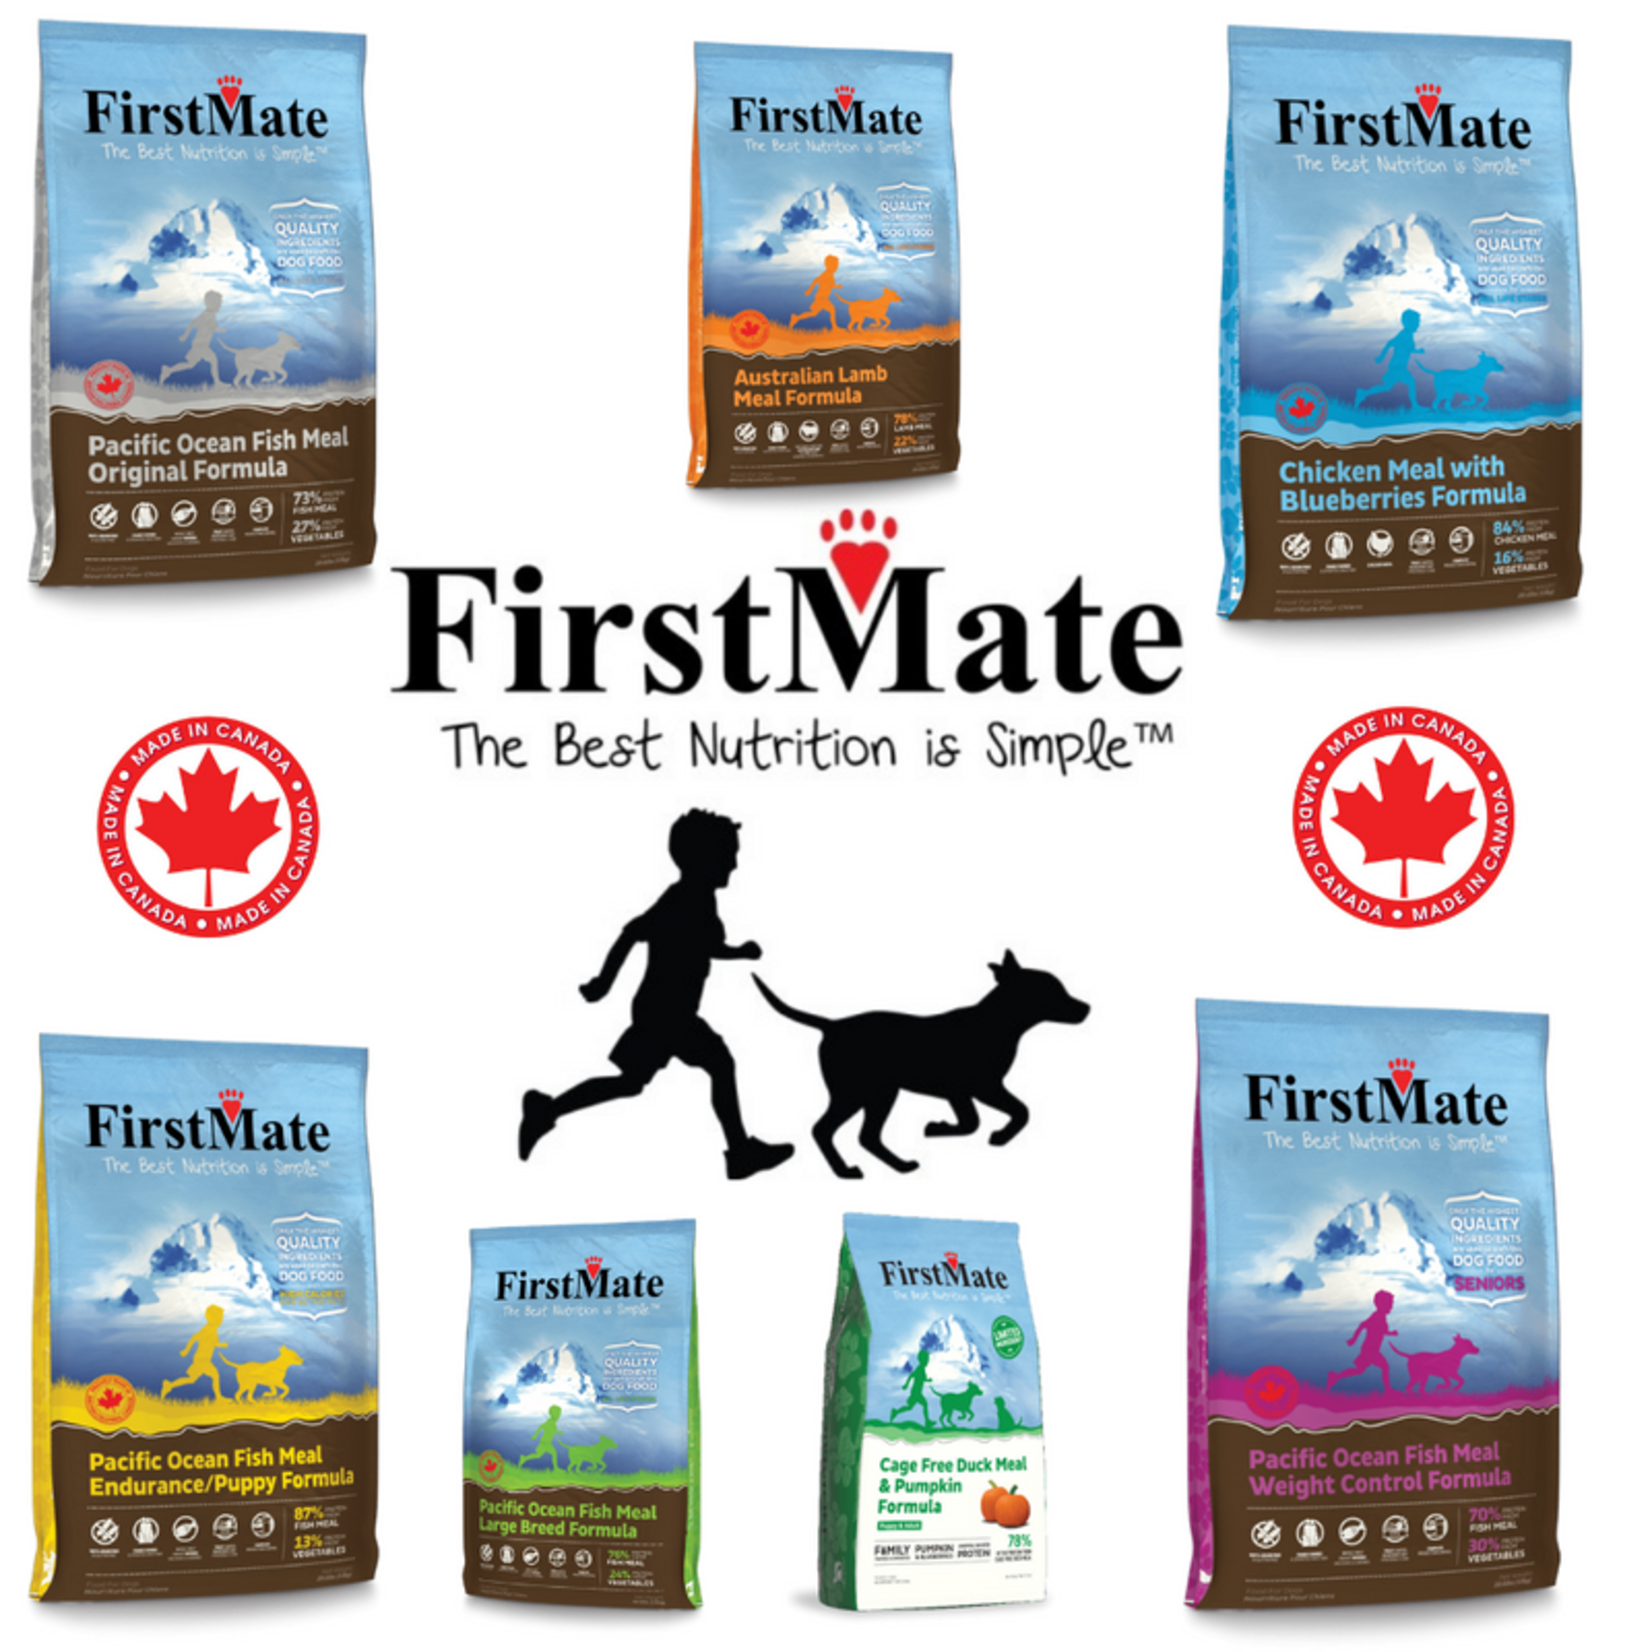 First Mate First Mate - Grain Free Dry Dog Food